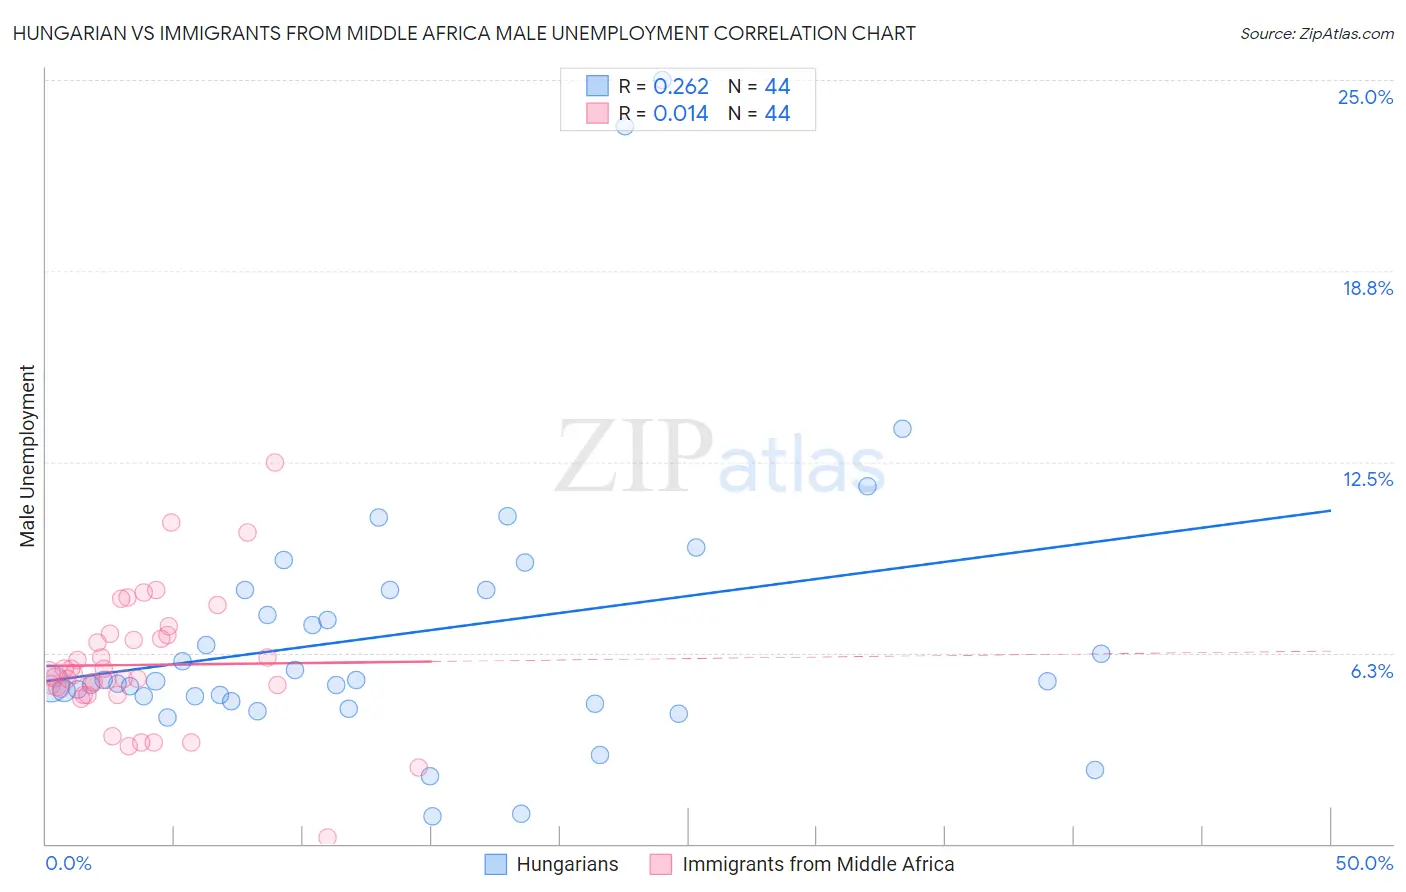 Hungarian vs Immigrants from Middle Africa Male Unemployment